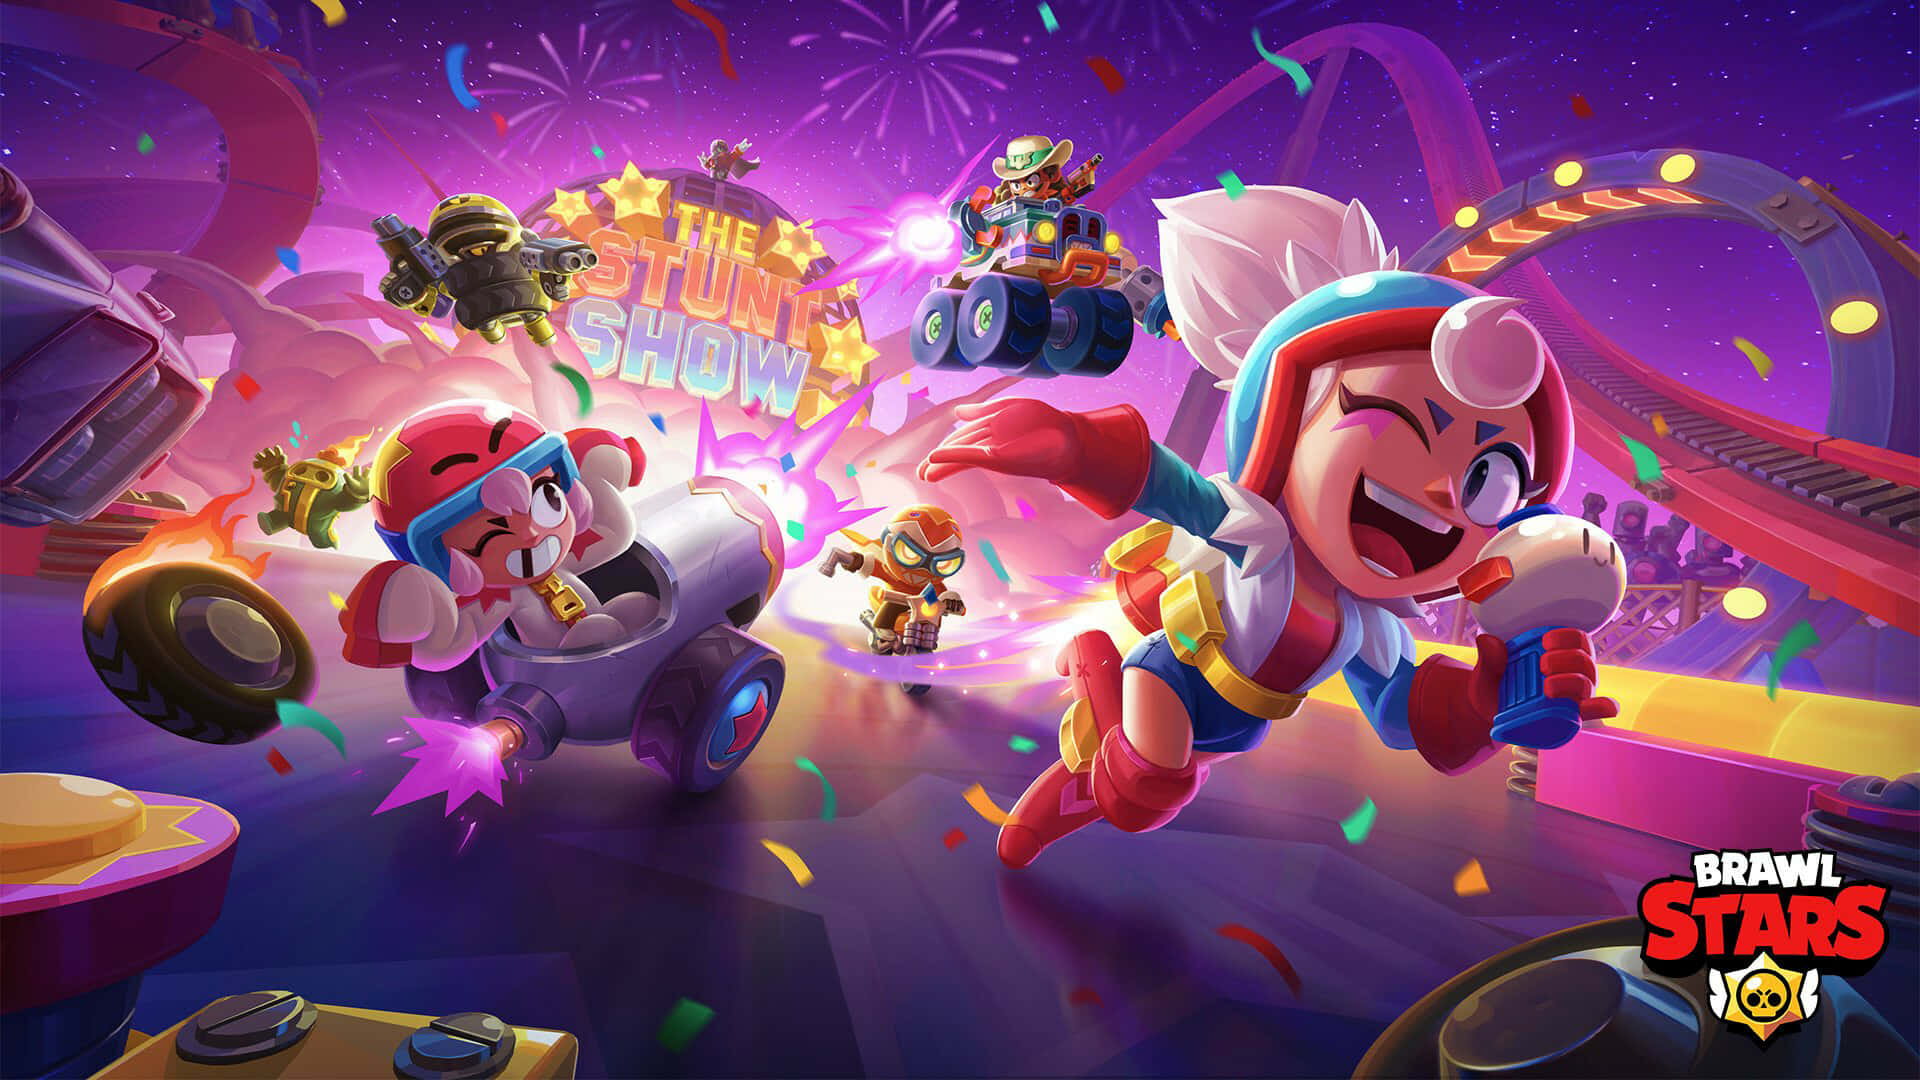 Get ready to Brawl with friends and family with Brawl Stars!